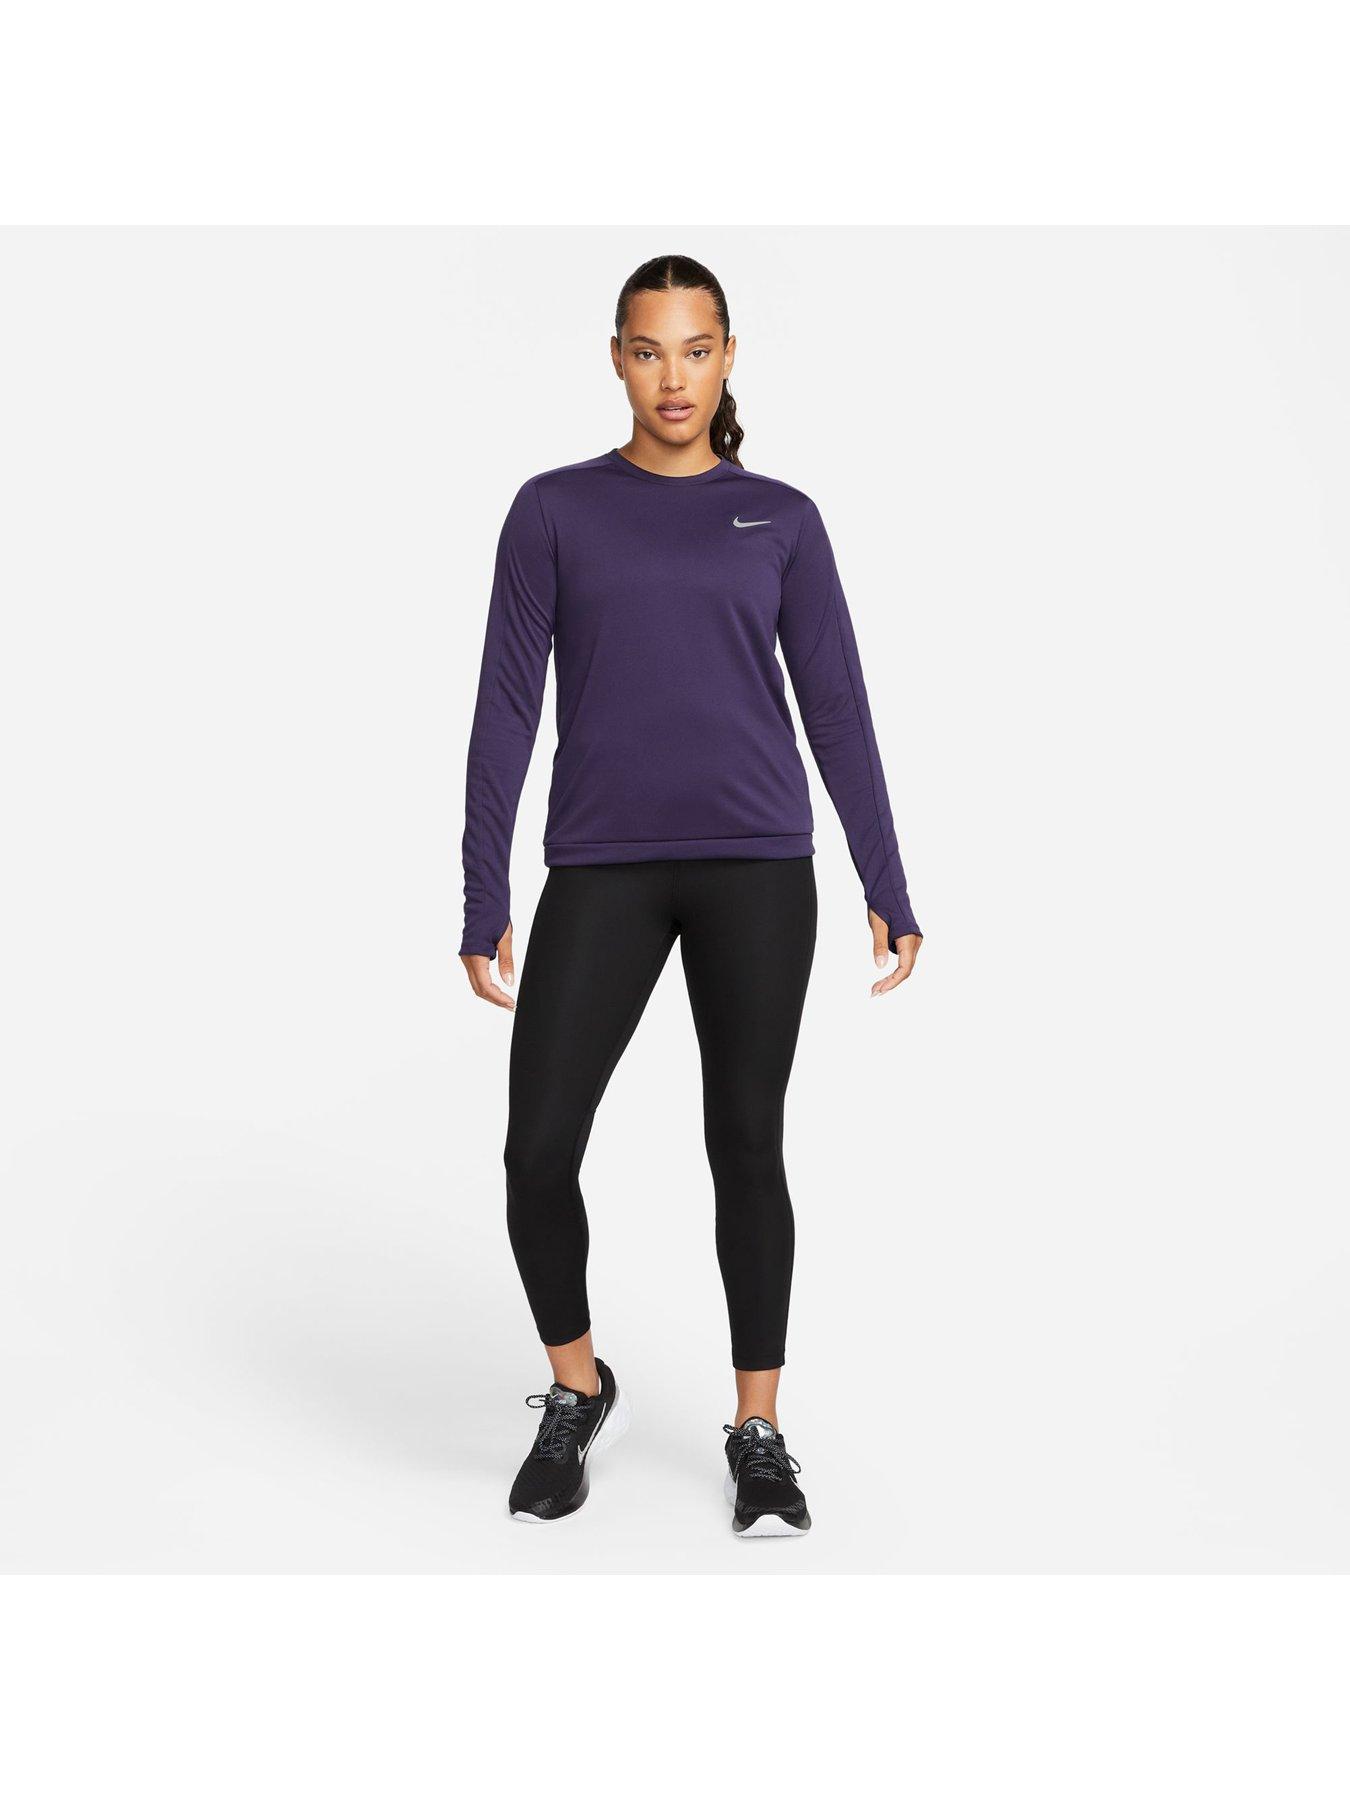 A Fitness Editor Reviews Nike Dri-FIT Go Firm Support High-Waisted